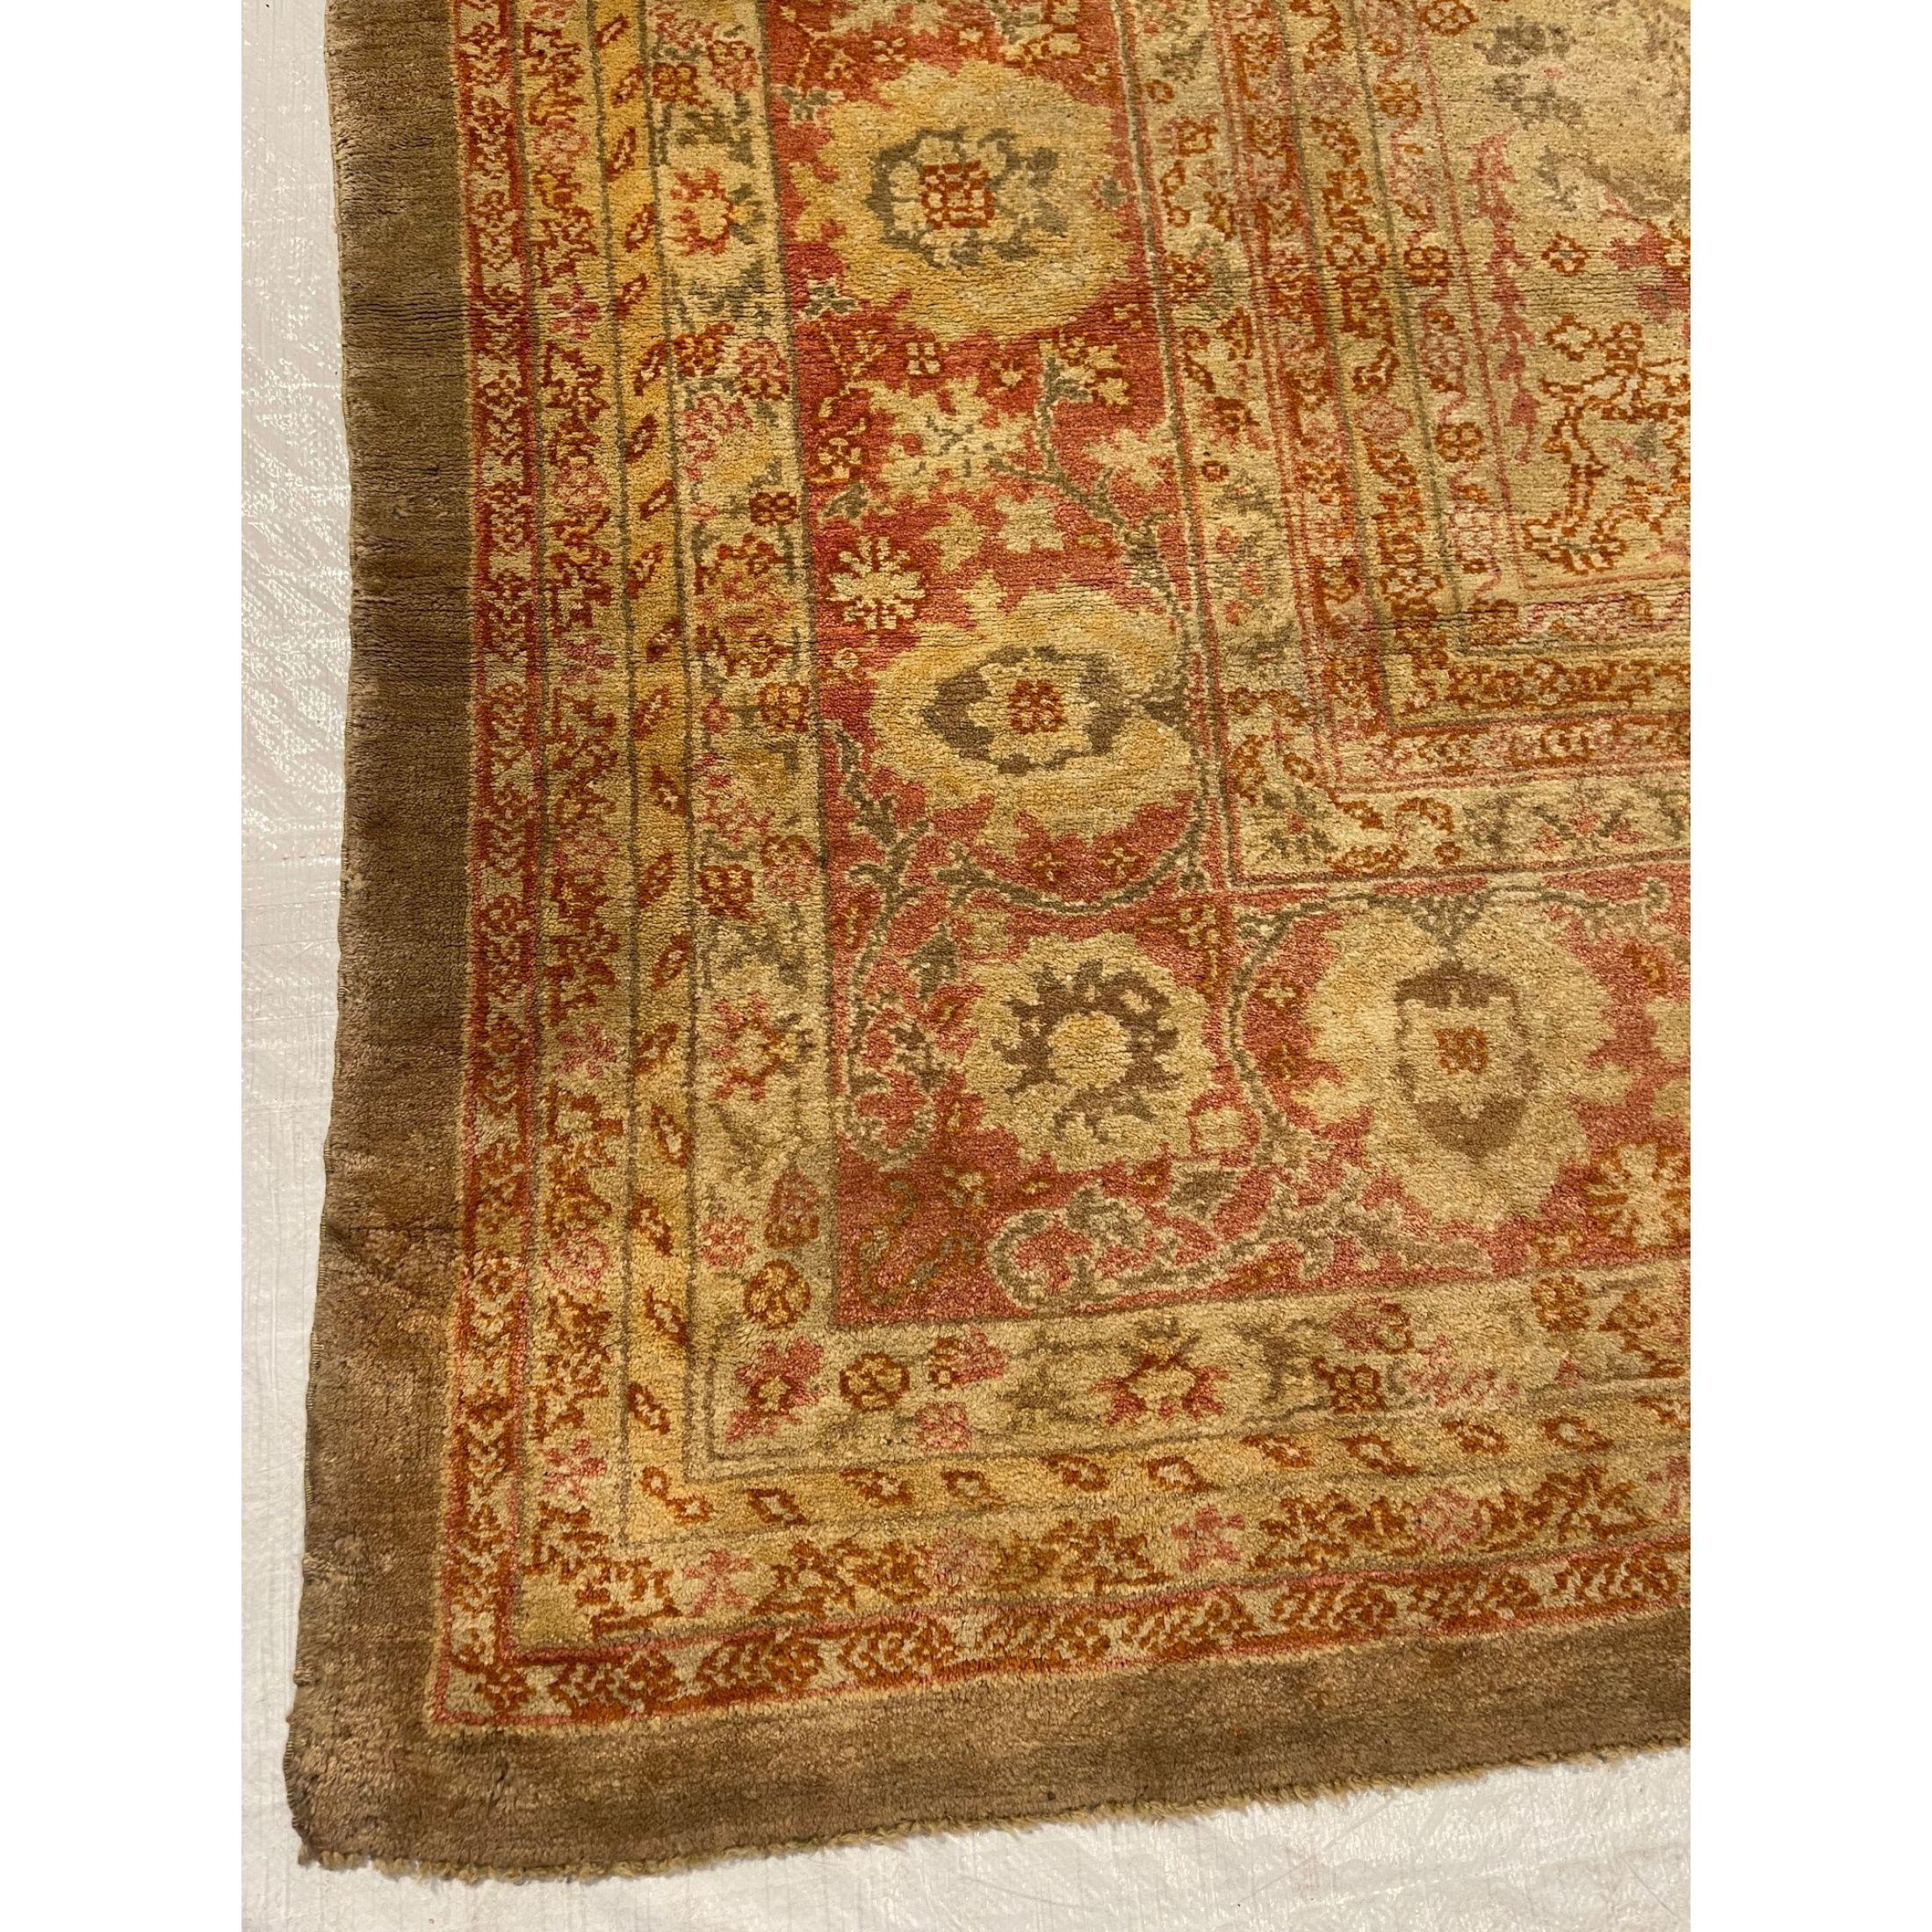 Antique Indian Rugs – Not all the rugs that were woven in India are easy to categorize. That is why we created this antique Indian rugs section. Here you will find Indian rugs of which the origin city isn’t specifically identified. This blanket